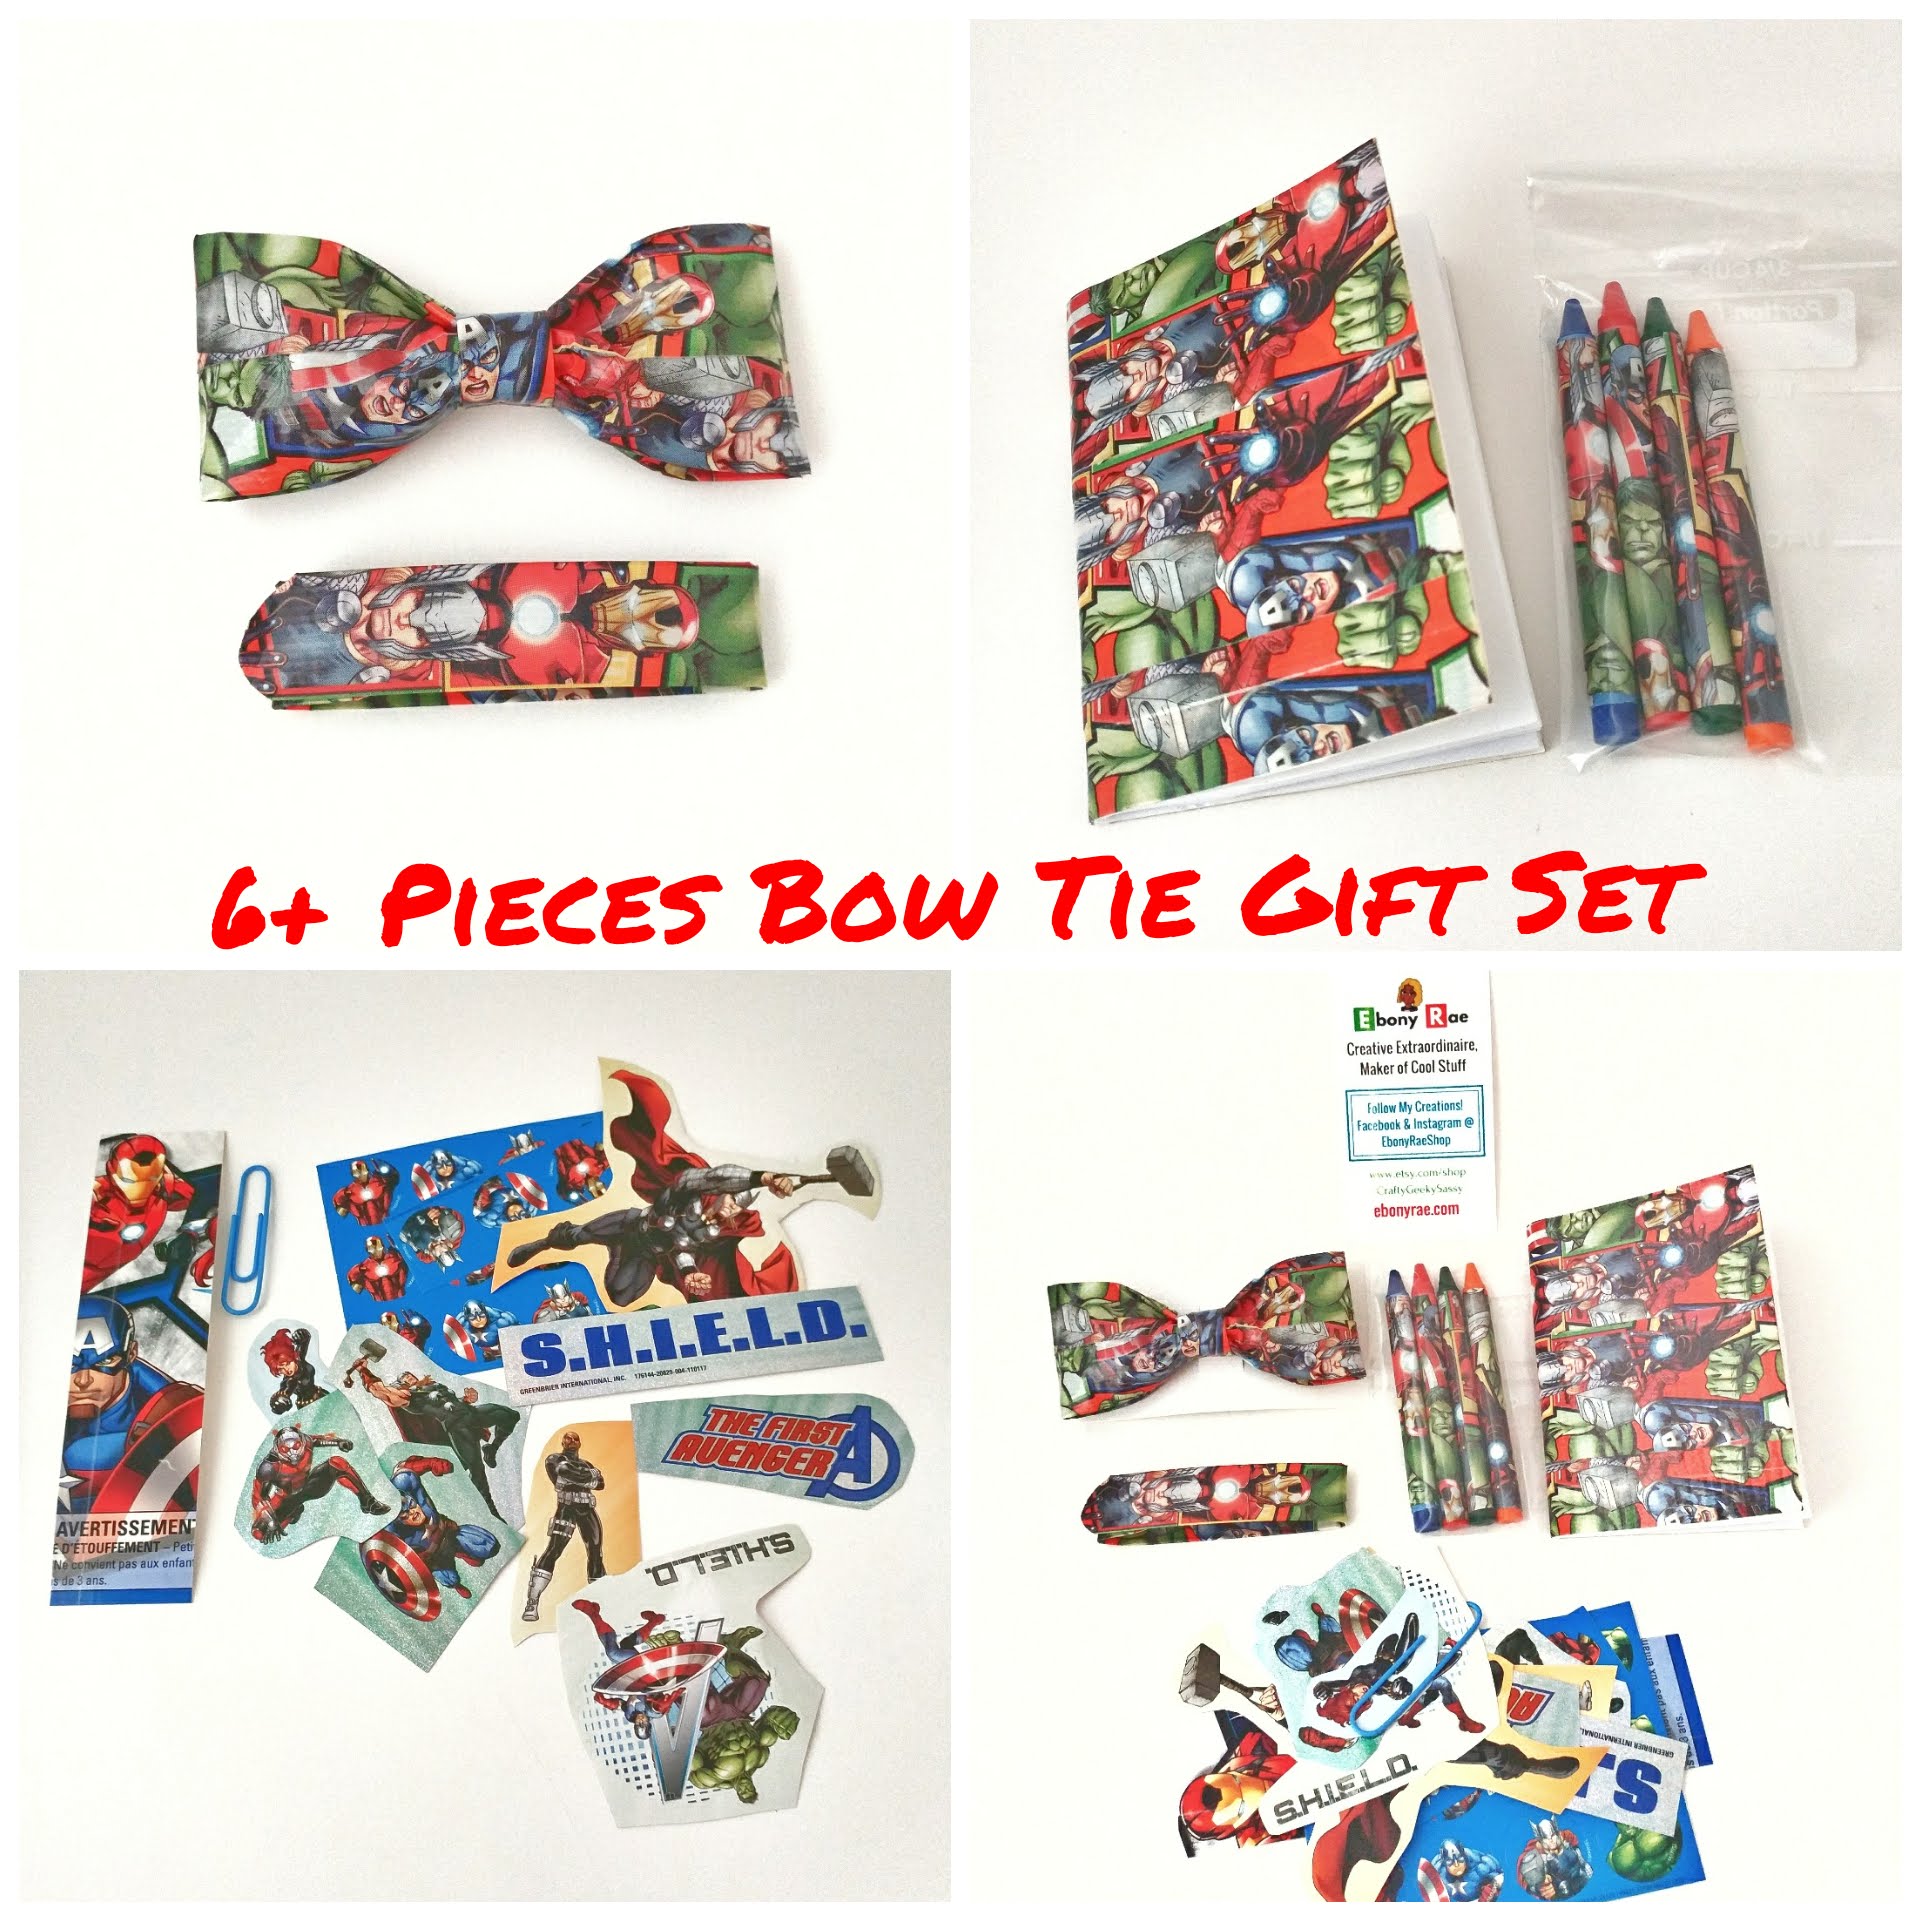 Red and green Avengers bow tie gift set with crayons, notebook, and stickers.